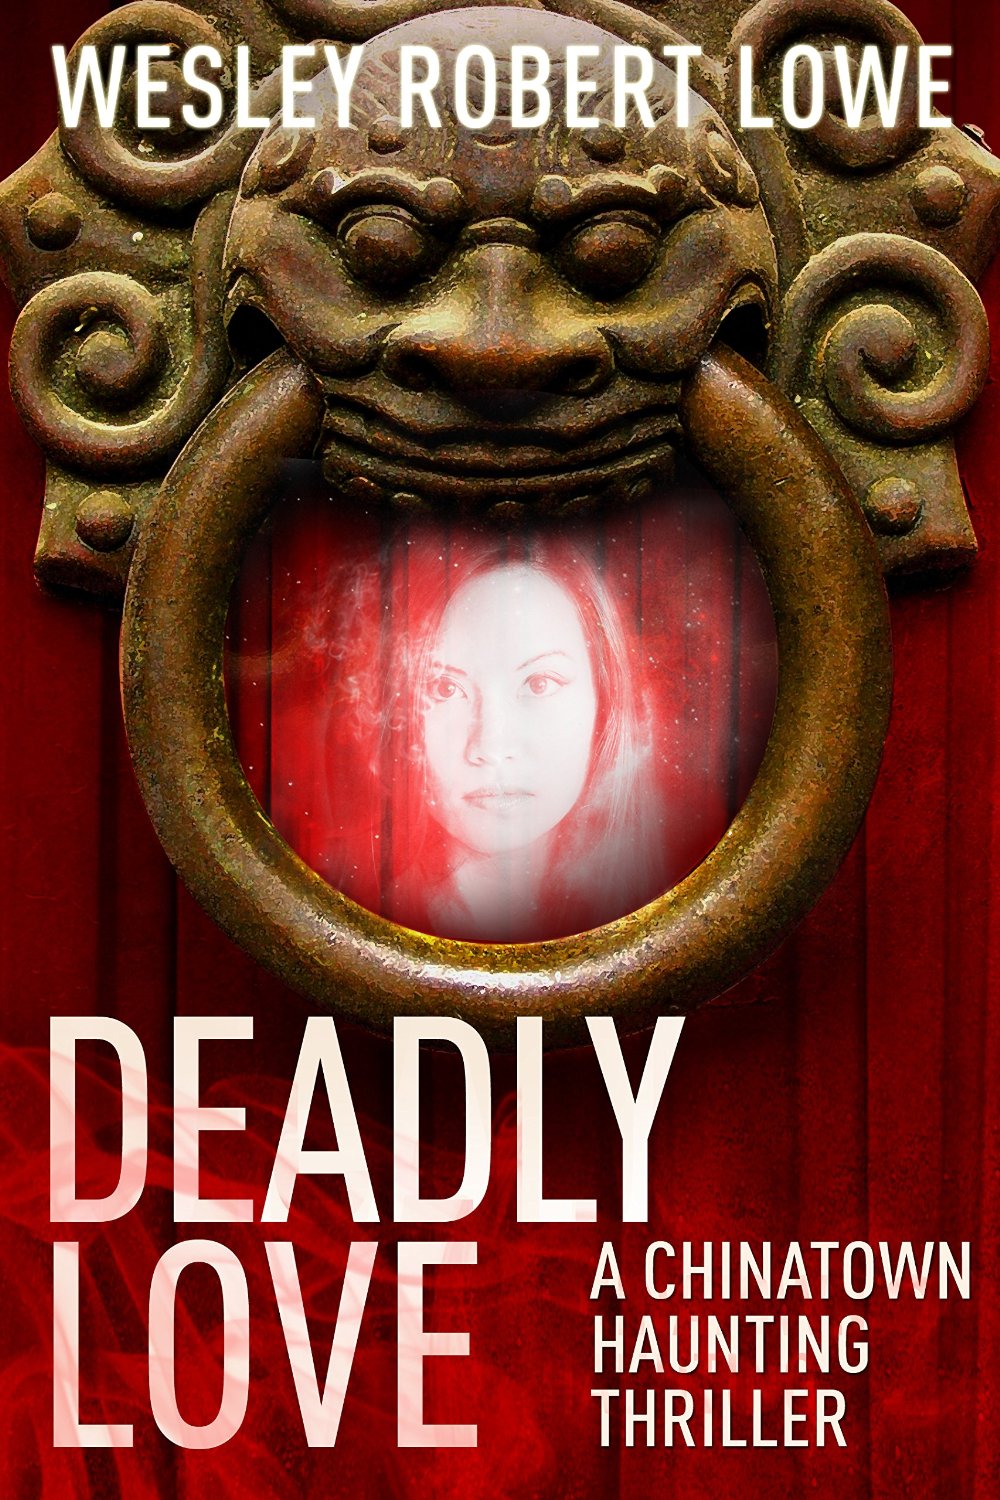 DEADLY LOVE (Chinatown Haunting Paranormal Thriller Series Book 1) by Wesley Robert Lowe